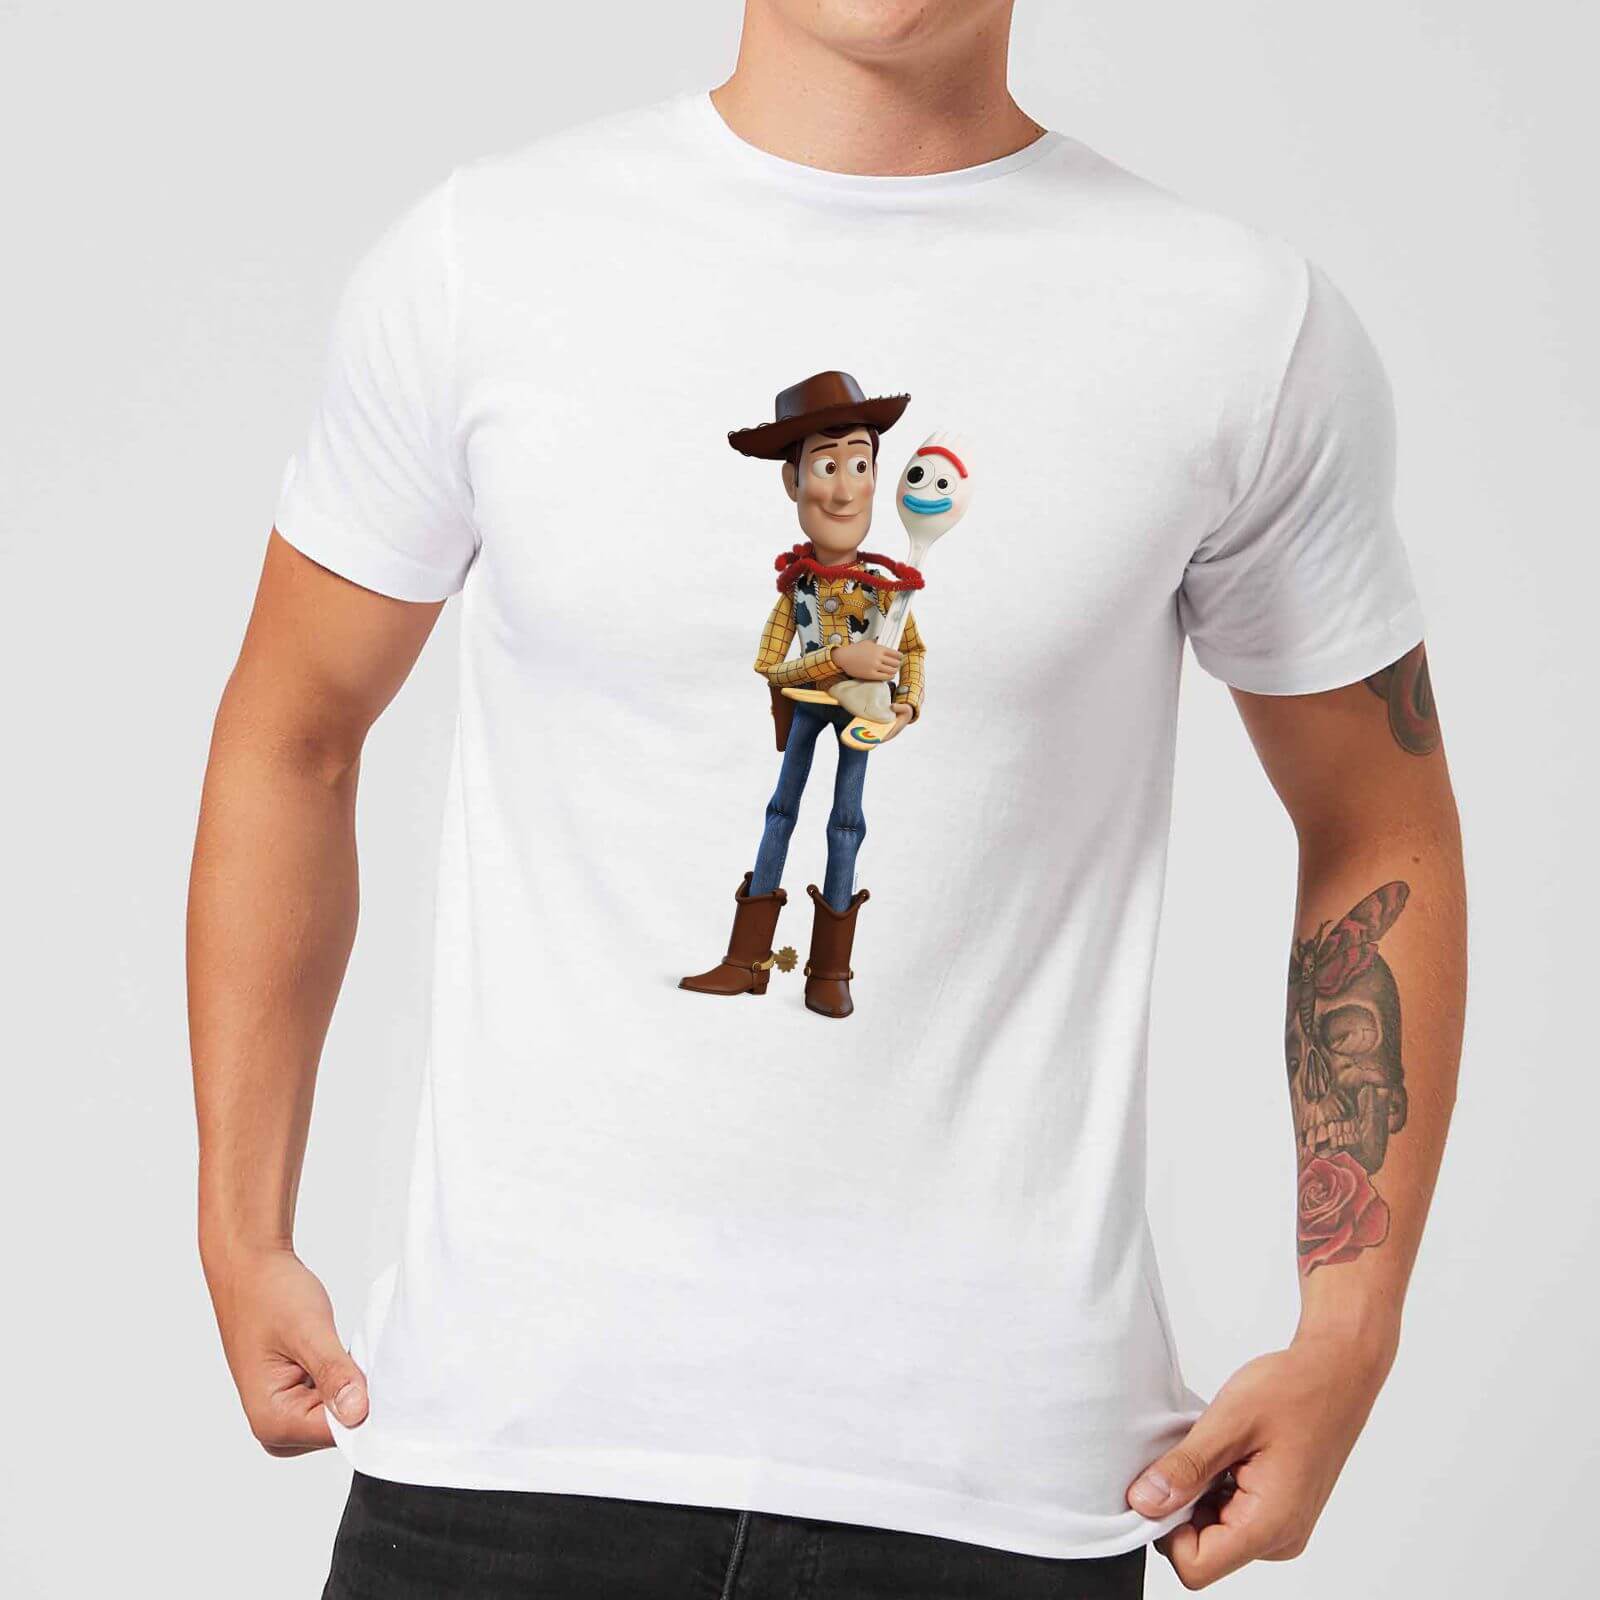 Toy Story 4 Woody And Forky Men's T-Shirt - White - S - White